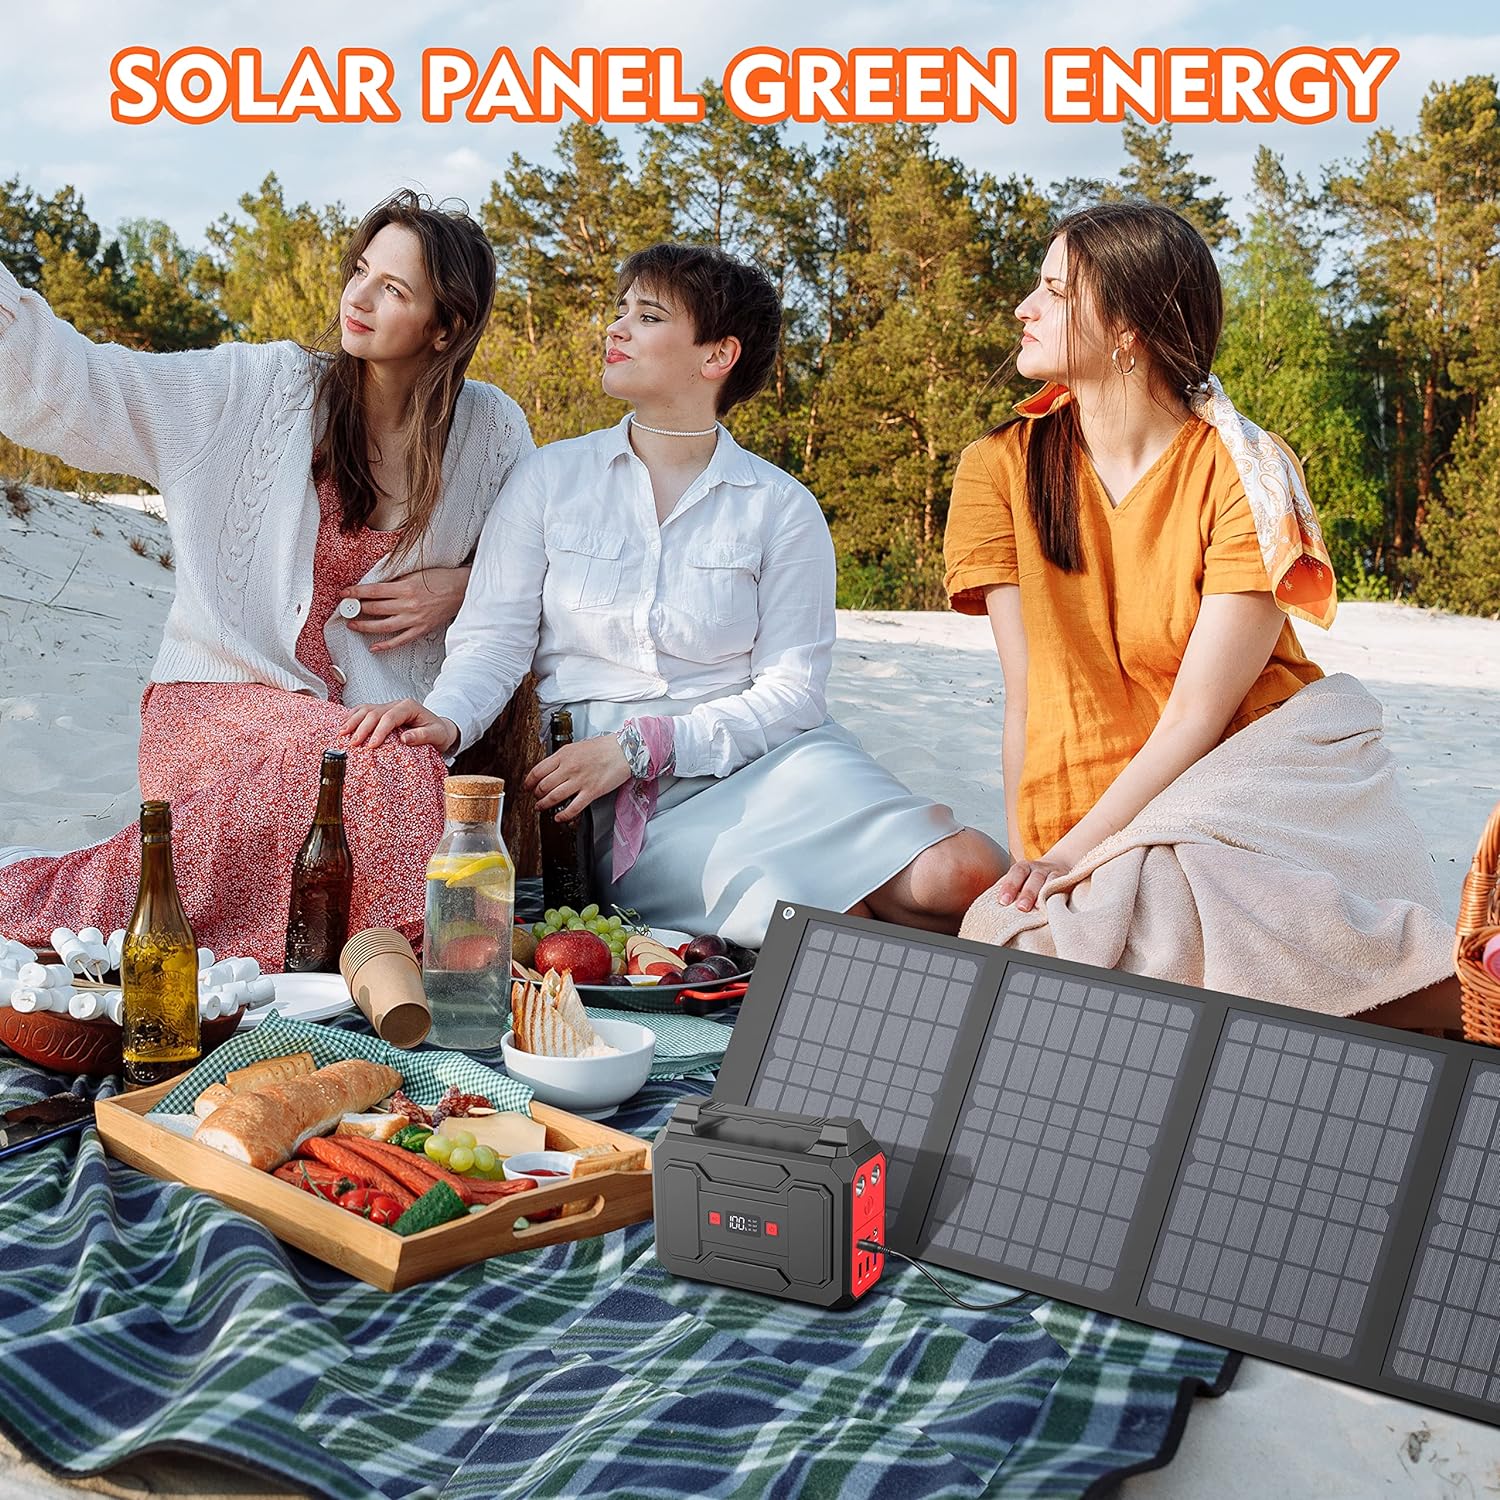 60W Portable Solar Panels, Foldable Solar Panel Charger for 100-500W Solar Generator Portable Power Station, with Adjustable Kickstands, DC 18V Output, USB 3.0 and Type-C Ports for Camping Van RV Trip - 60W Portable Solar Panel Review